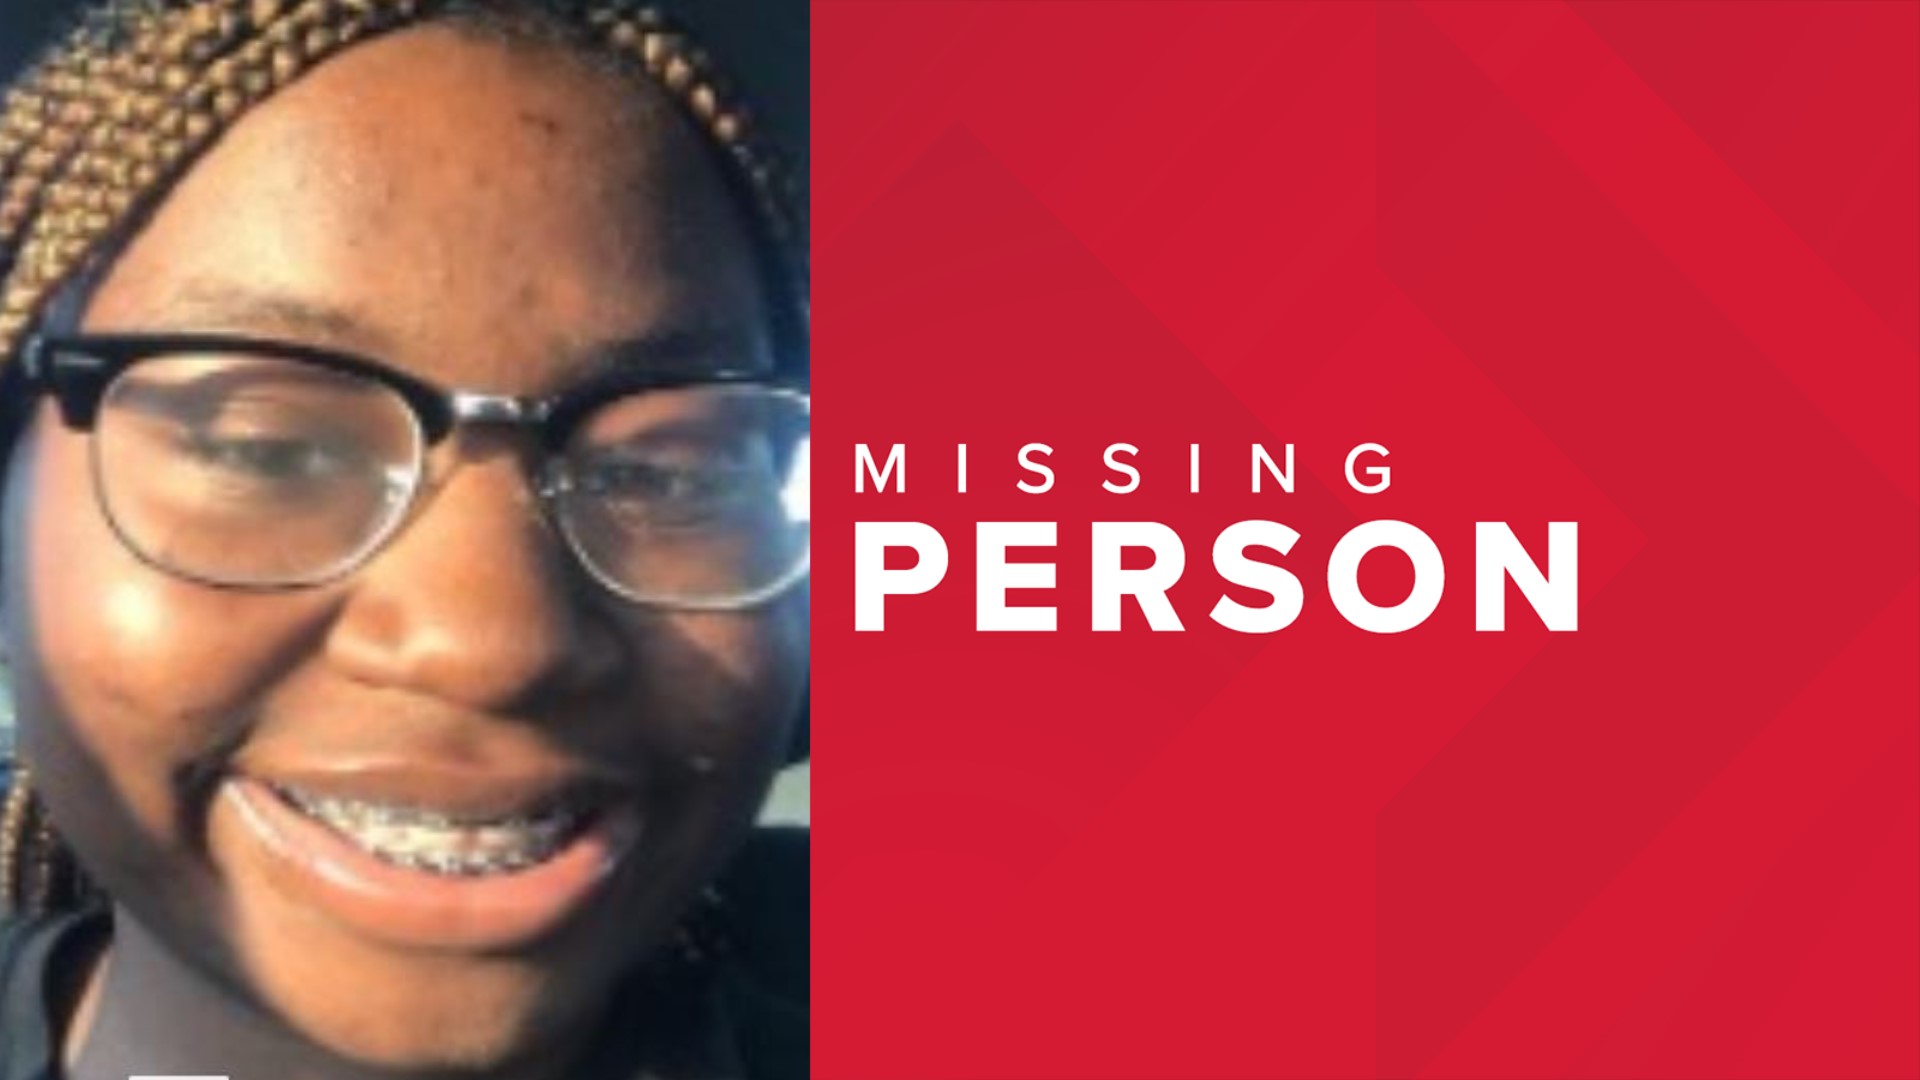 Iness Imelda Injiongo was last seen shortly after 1 a.m. Saturday along the 200 block of North Comal Street, just west of downtown.